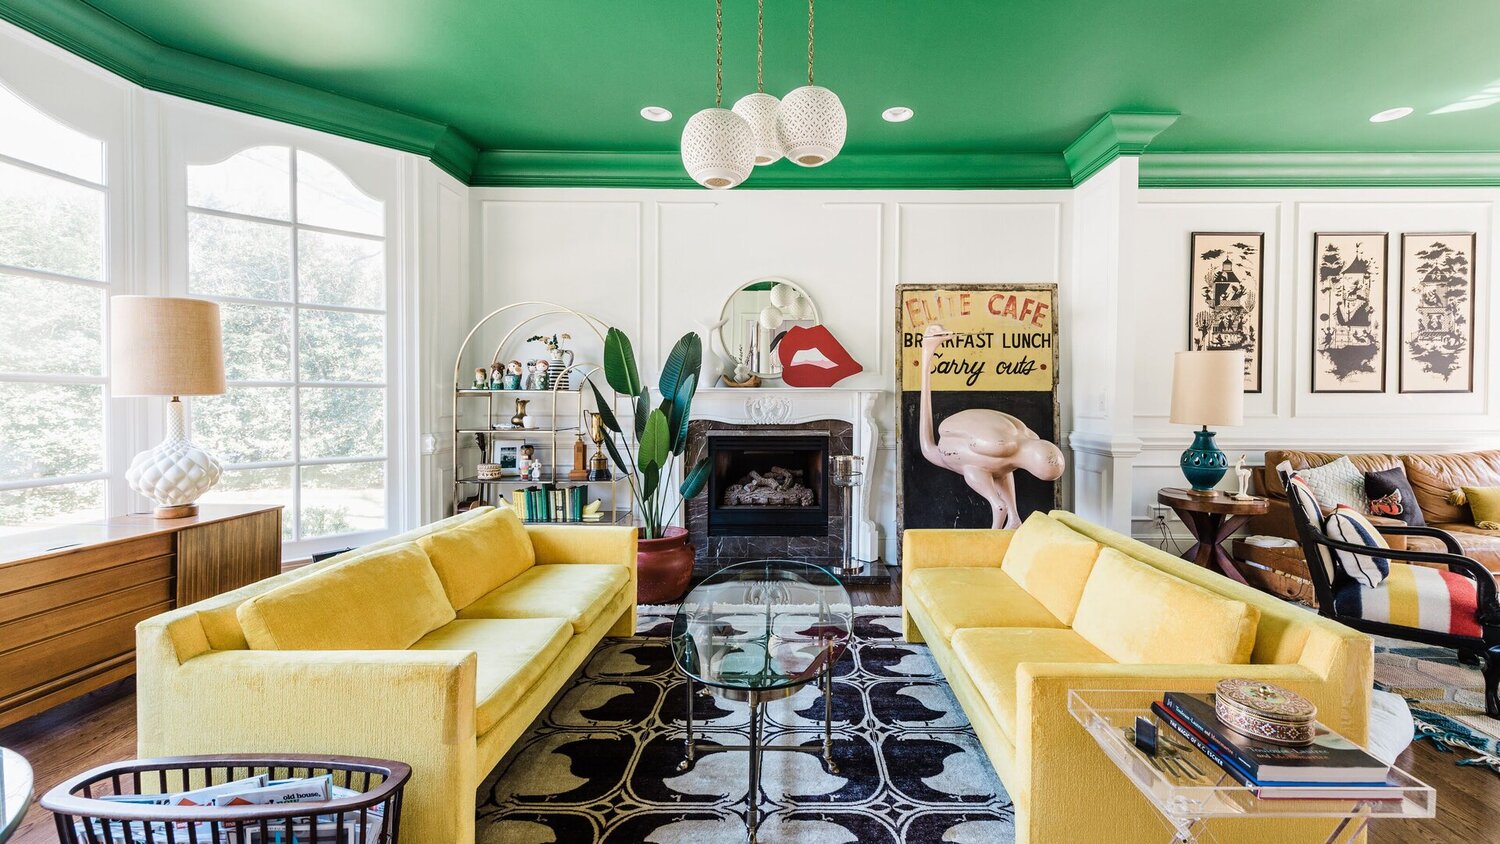 What Colors Make A Room Feel Happy? Color Psychologists Say These Shades Boost Well-Being